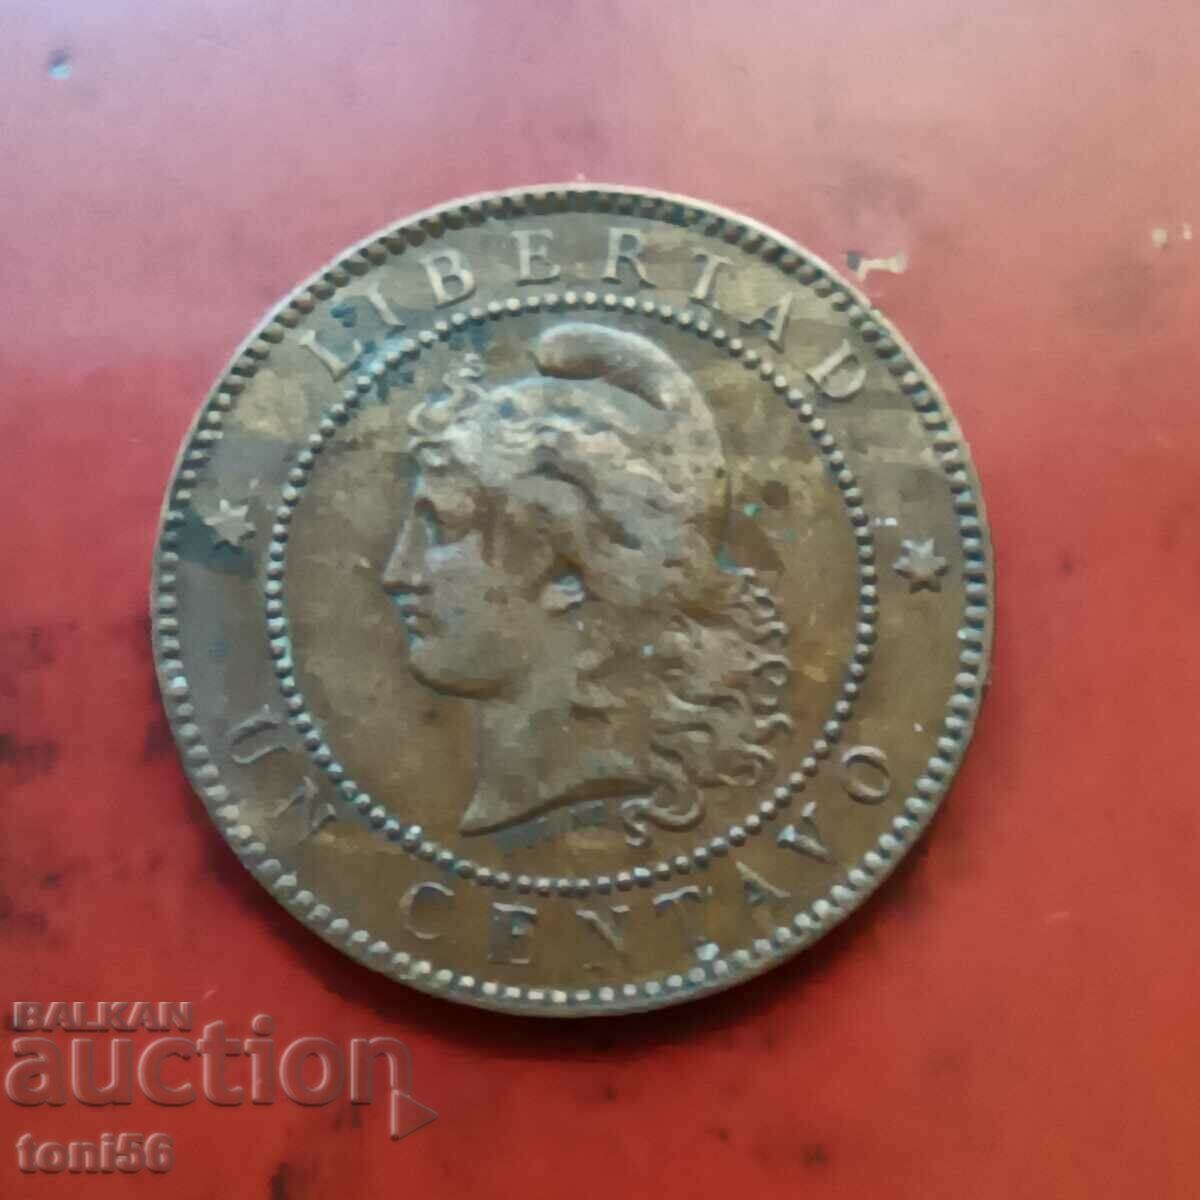 Argentina 1 centavo 1884 - from collection